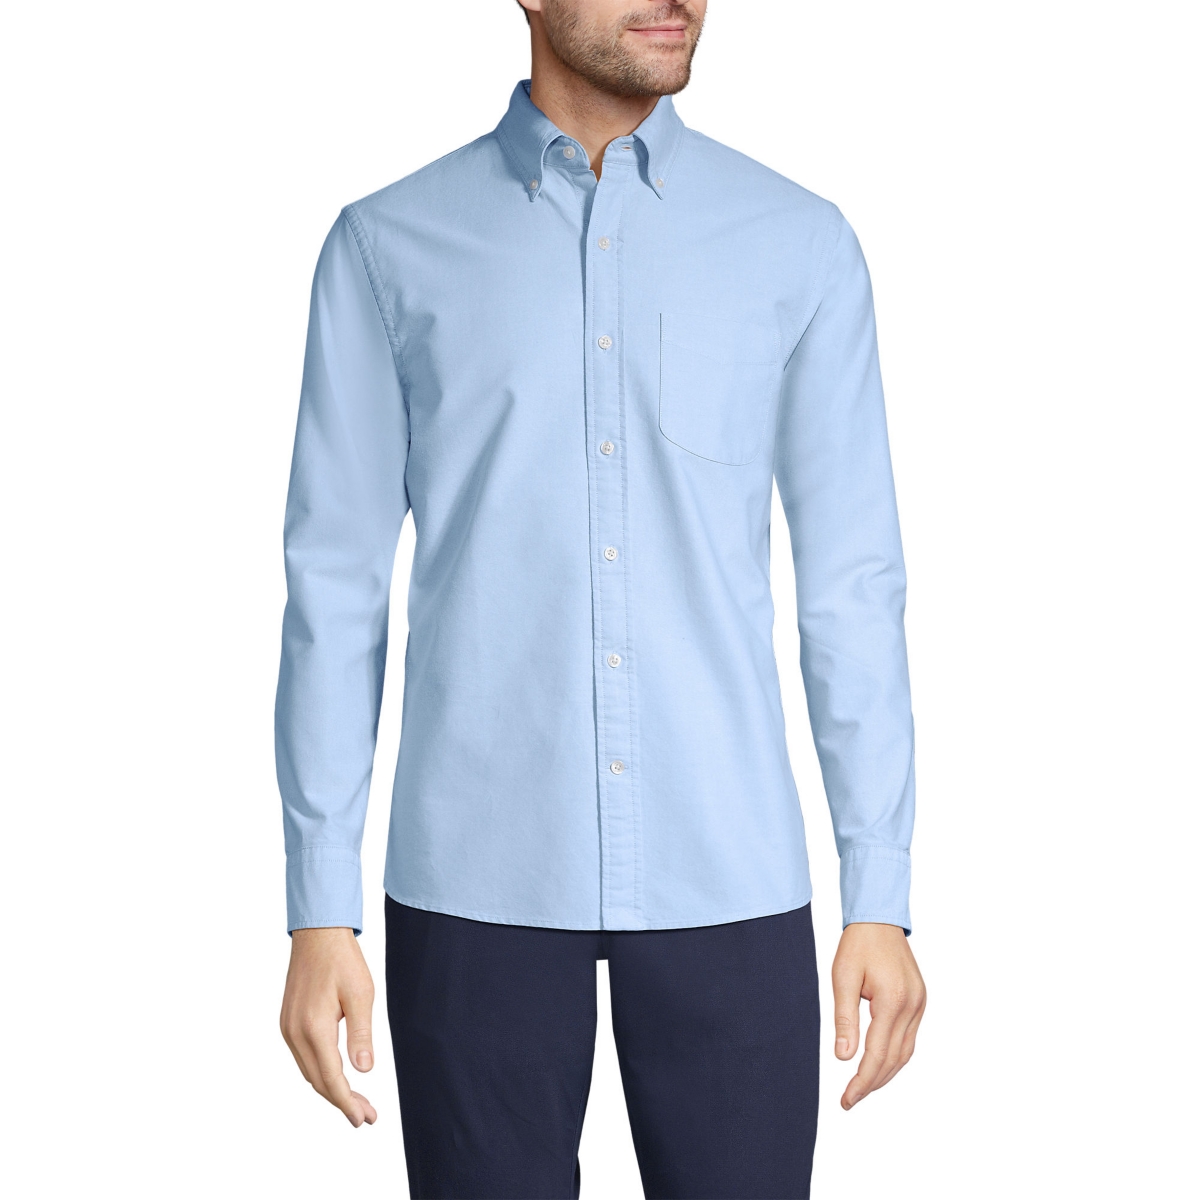 Men's Tailored Fit Long Sleeve Sail Rigger Oxford Shirt - Blue